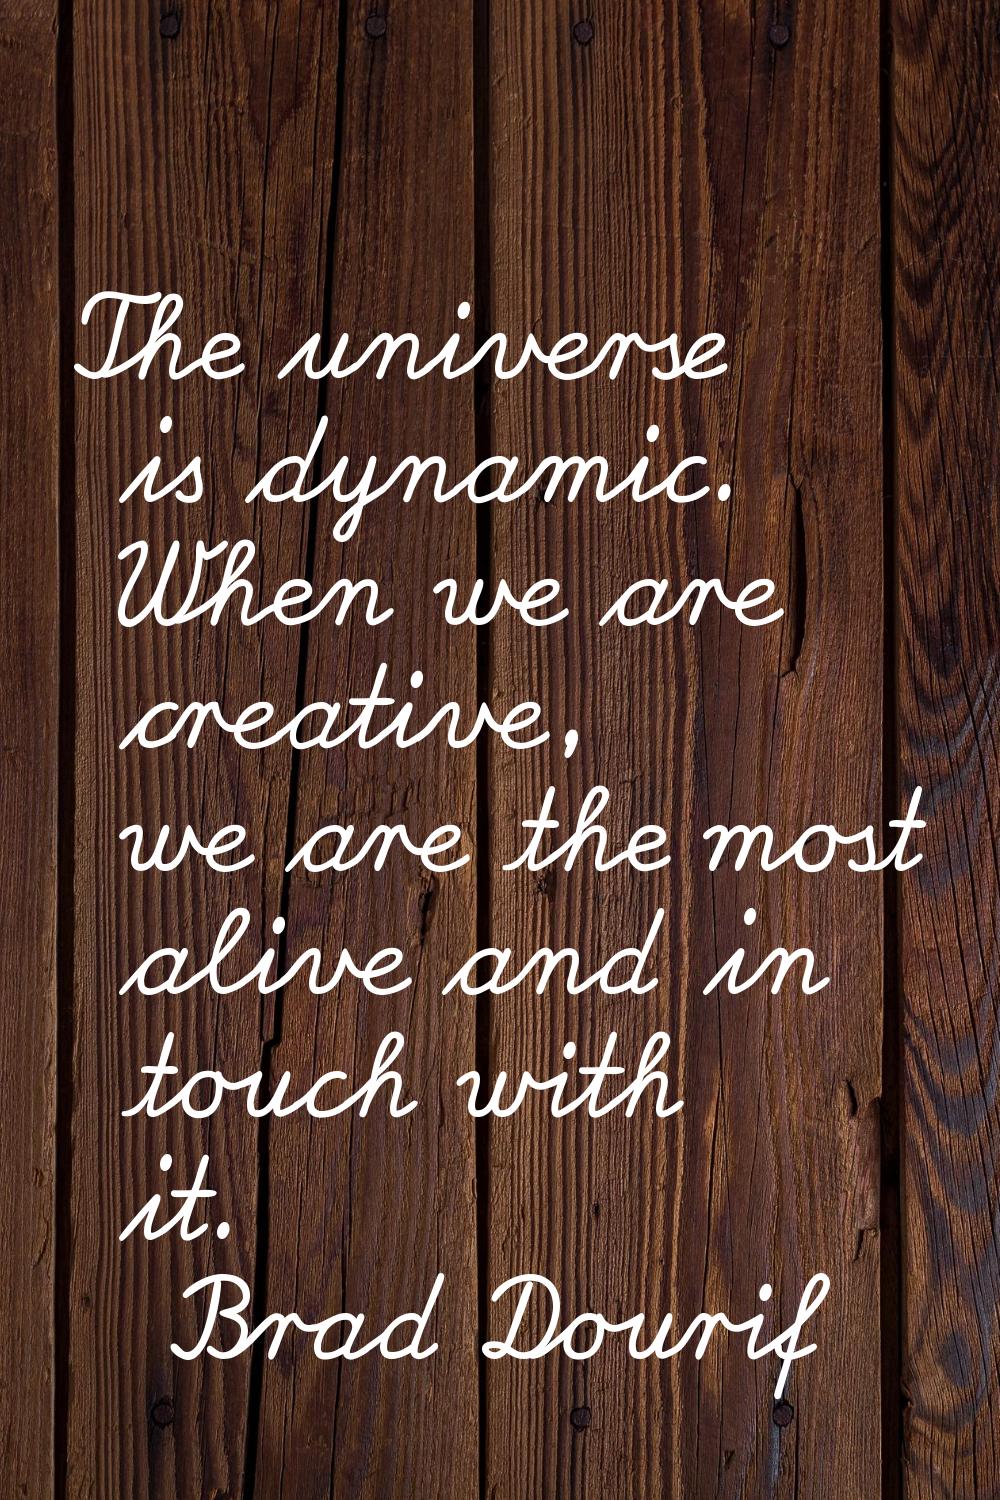 The universe is dynamic. When we are creative, we are the most alive and in touch with it.